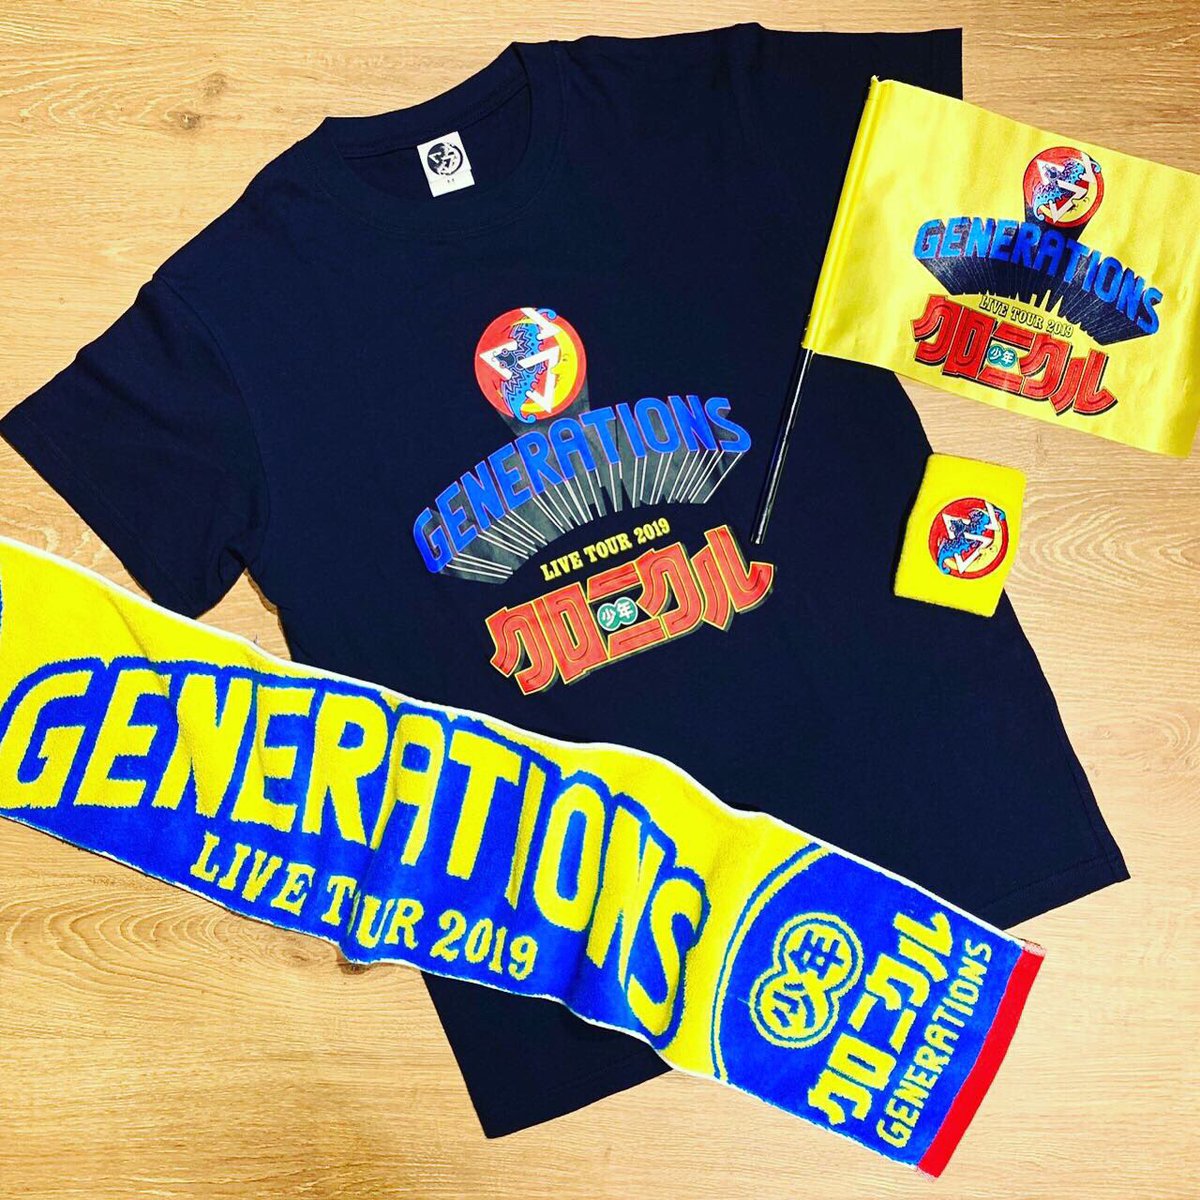 Exile Tribe Station On Twitter Generations Live Tour 2019 少年